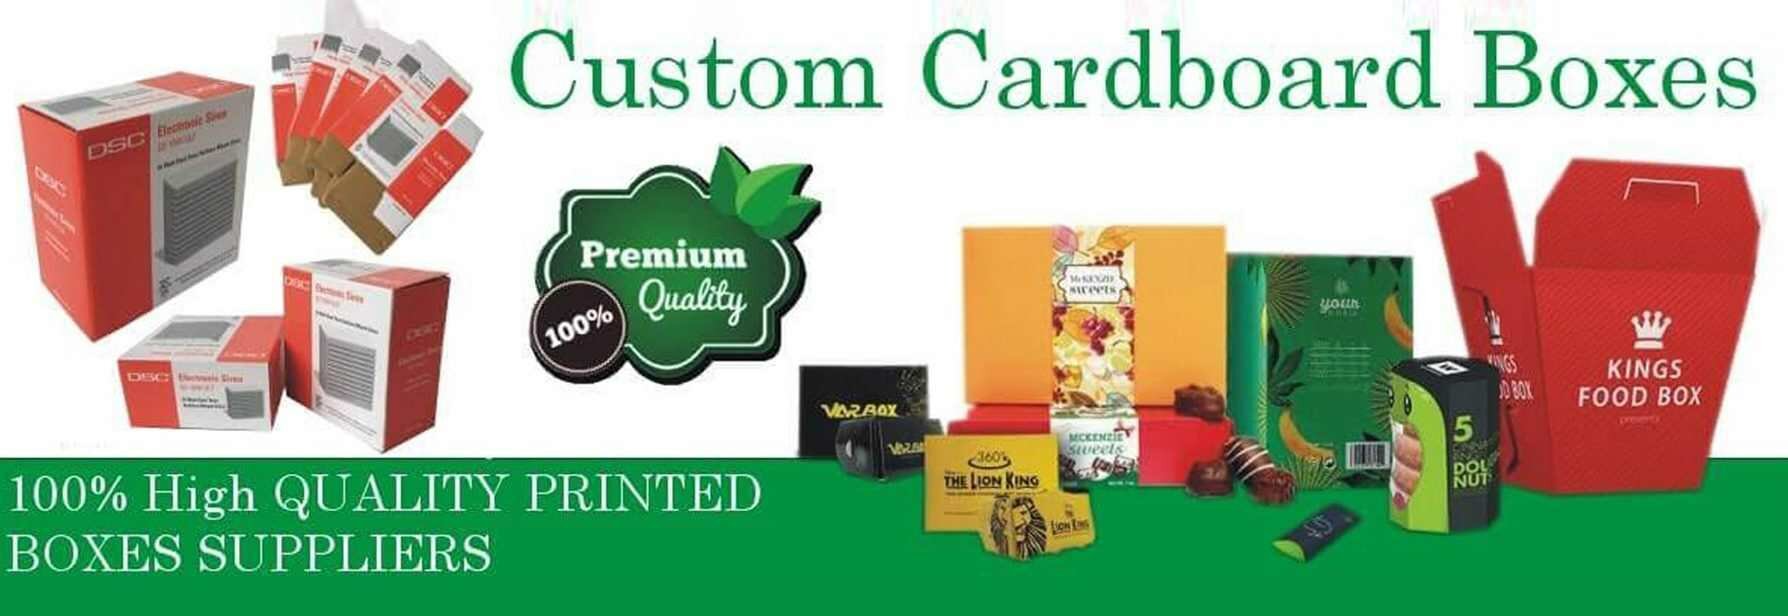 custom boxes for business, custom boxes shipping, kicker custom boxes, custom boxes for shipping, short run custom boxes, custom boxes cada, making custom boxes, packaging custom boxes, order custom boxes online, make custom boxes,